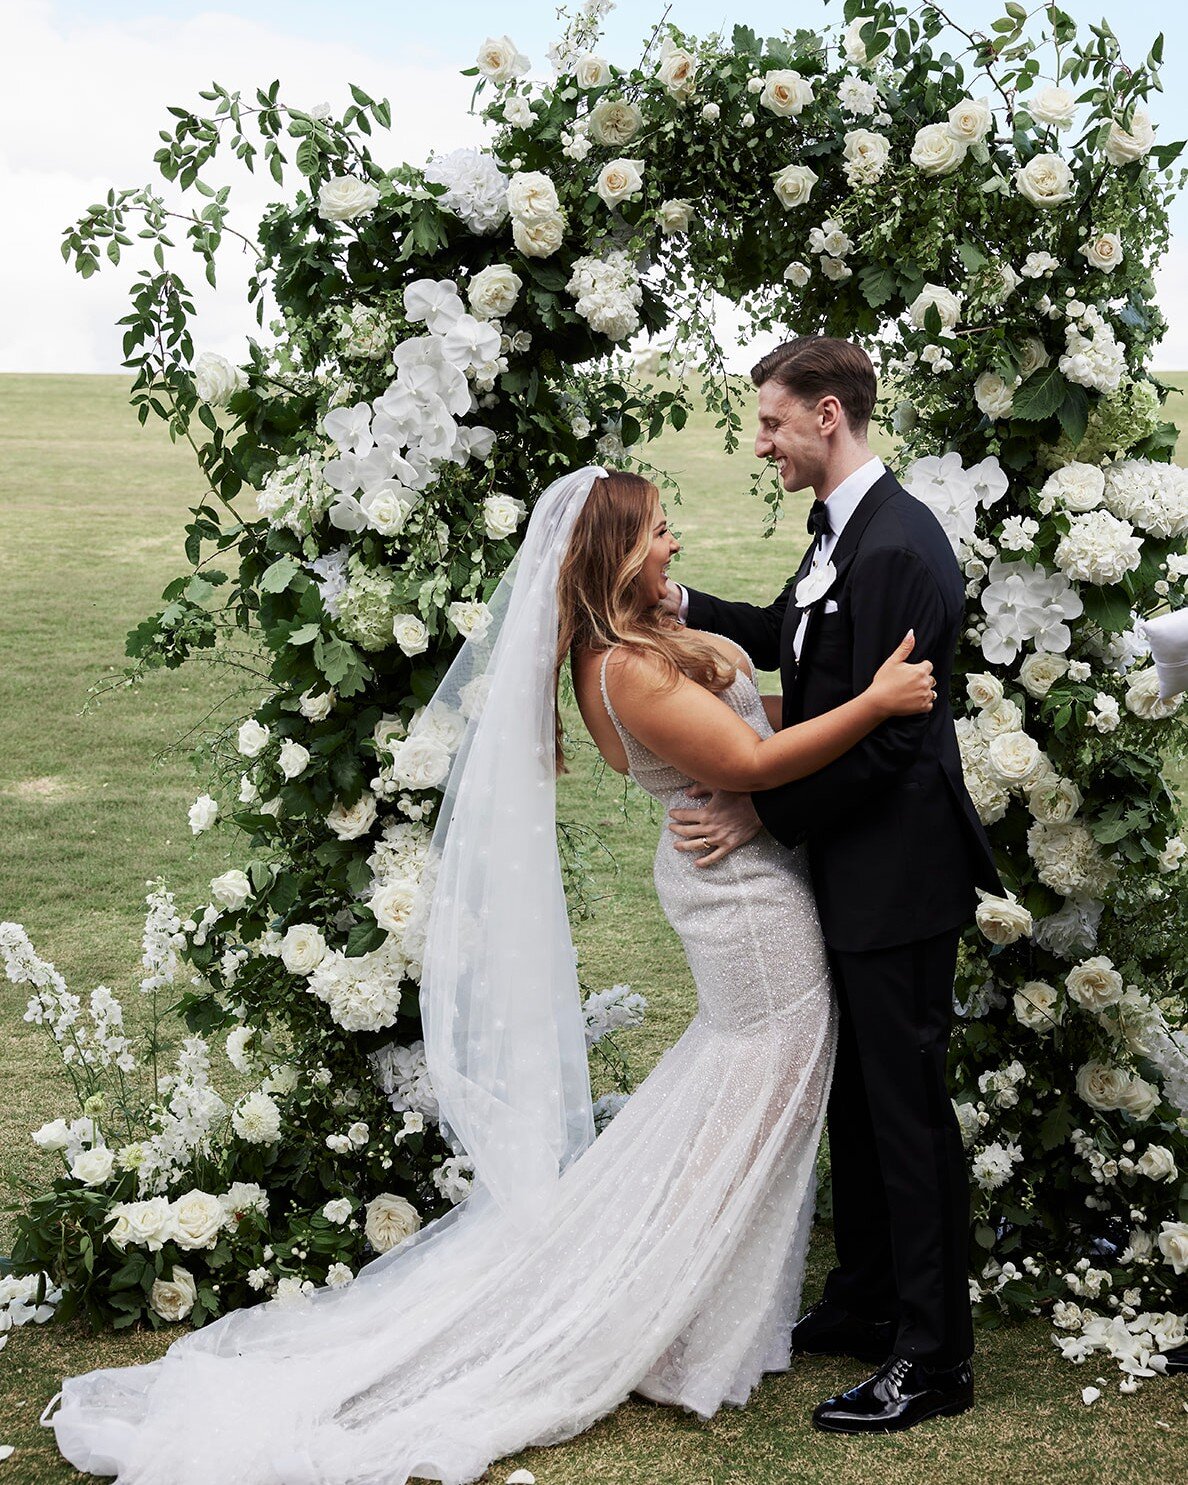 Still swooning over these totally gorge photos of N &amp; C from November. 

Head over to the website to see the full gallery. Link in bio.

@harrietthubertestate 
@louloumemphis 
@kyhastudios
@petethecelebrant 
@andymurphydj 
@sophiapafitis 
@pjohns